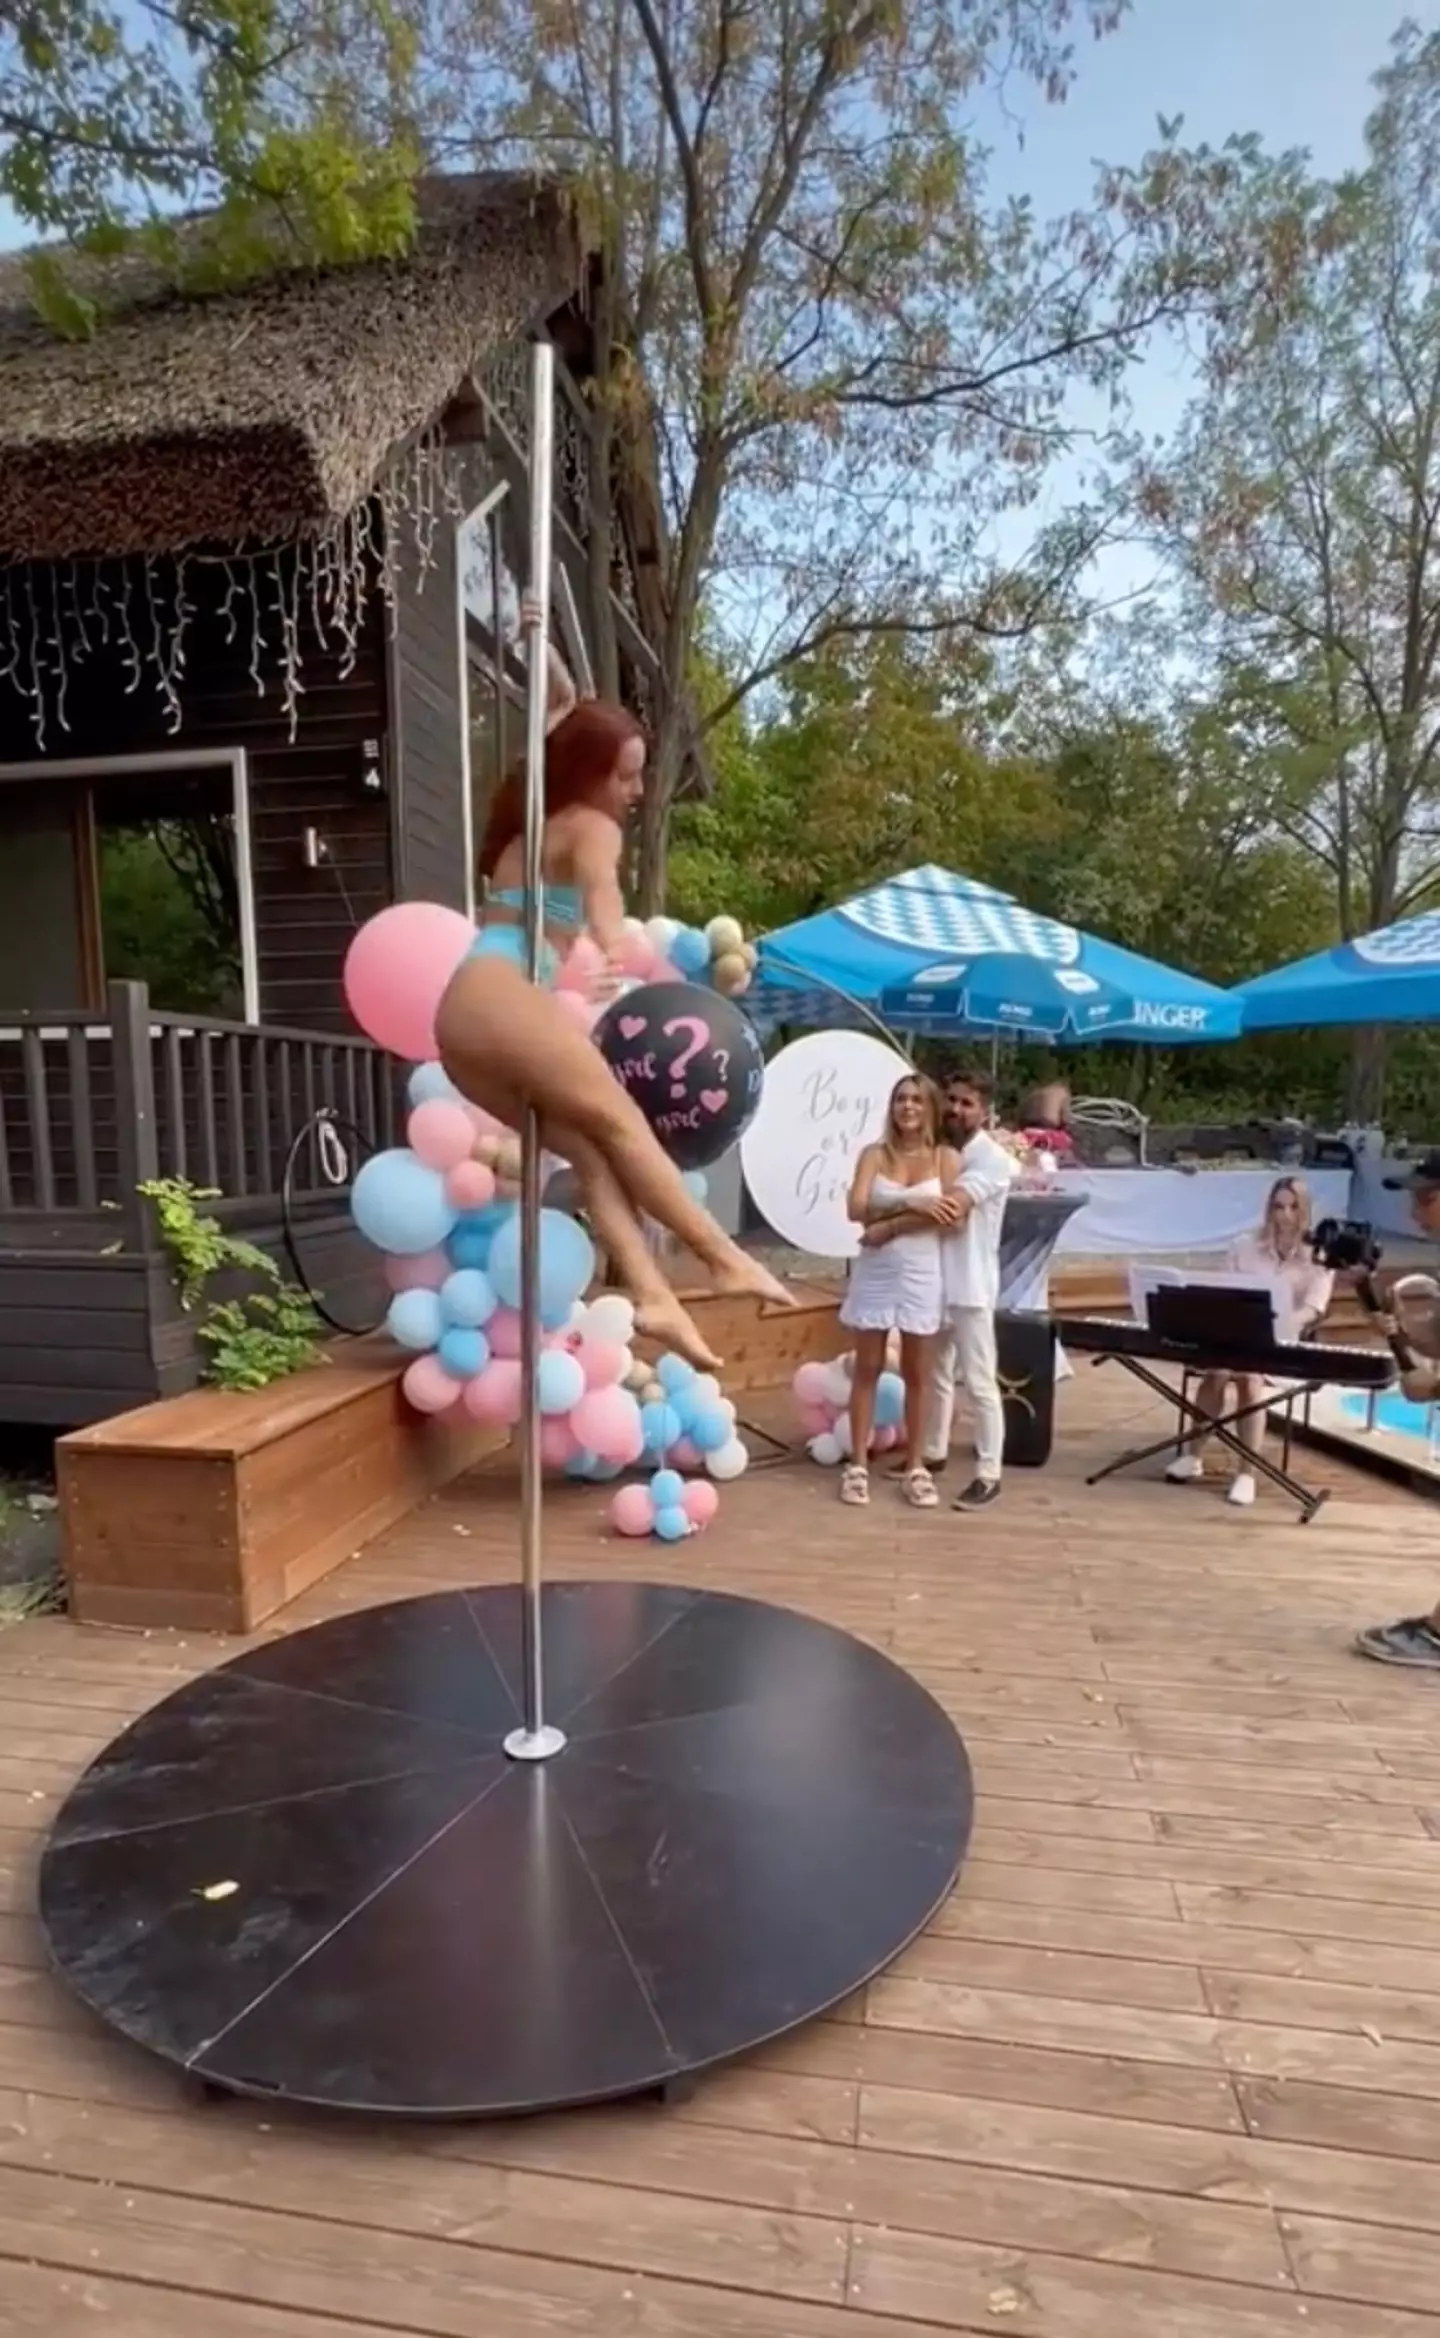 A couple from Moldova have sparked outrage after hiring pole dancers to reveal the gender of their baby.